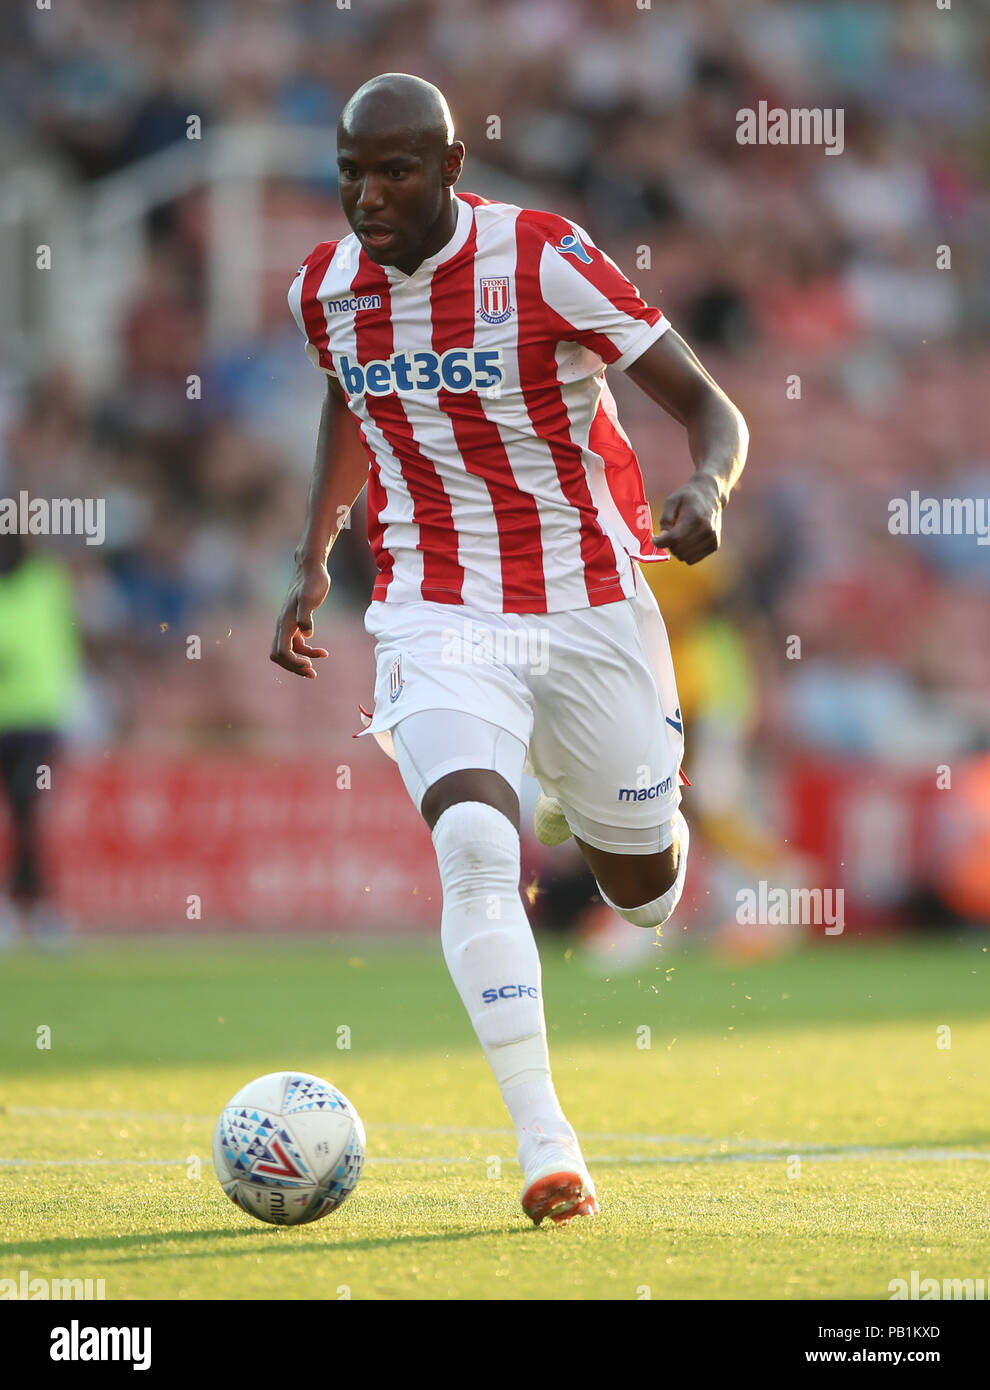 Stoke City's Benik Afobe during a pre season friendly match at The Bet365 Stadium, Stoke. PRESS ASSOCIATION Photo. Picture date: Wednesday July 25, 2018. Photo credit should read: Nick Potts/PA Wire. EDITORIAL USE ONLY No use with unauthorised audio, video, data, fixture lists, club/league logos or 'live' services. Online in-match use limited to 75 images, no video emulation. No use in betting, games or single club/league/player publications. Stock Photo